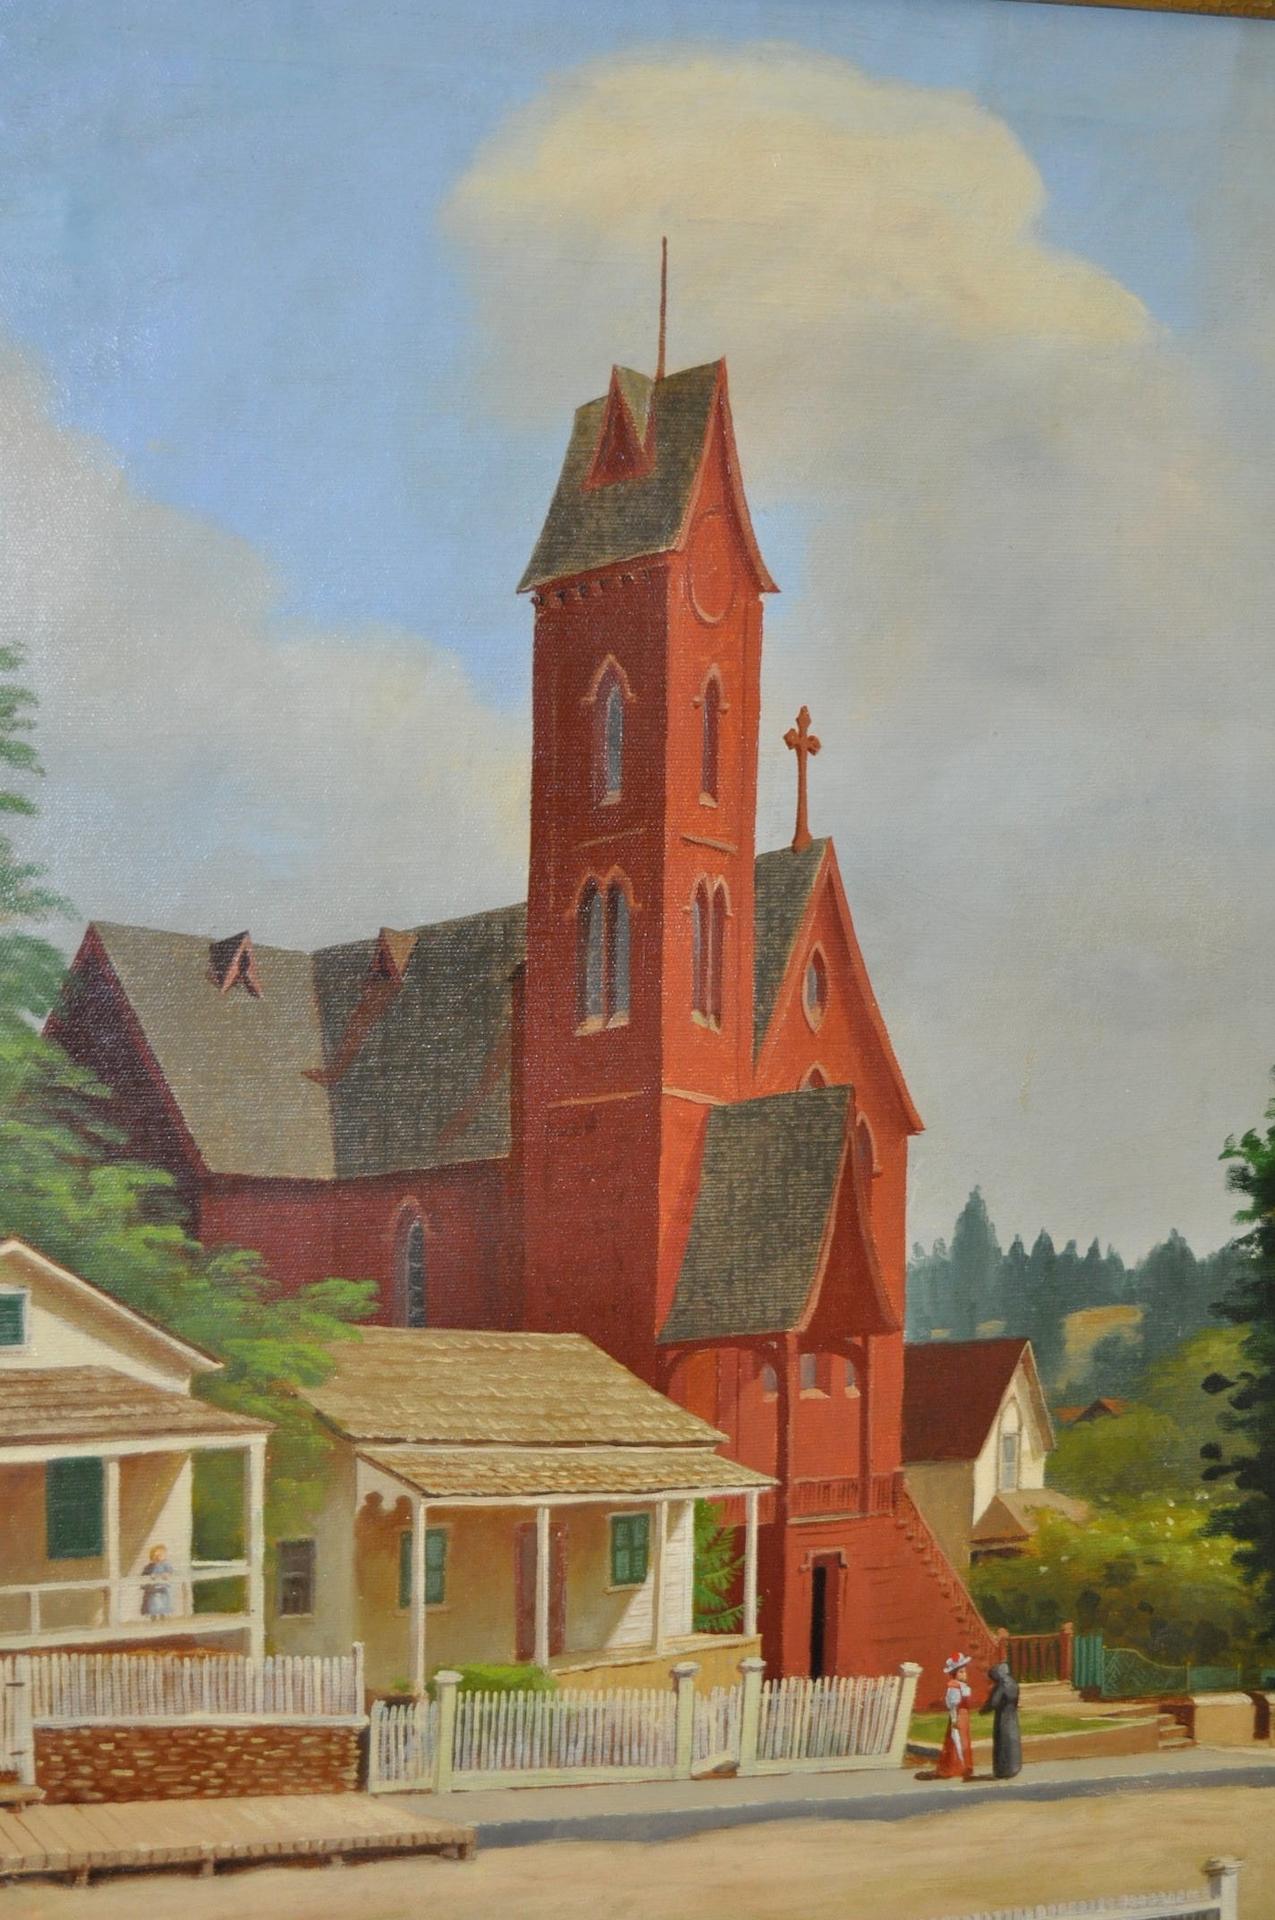 19th century oil on canvas signed R. Davenport. 

A stately red brick church in a country town setting. 

Oil on canvas dimensions 23 inches wide x 35 1/2 inches high. 

Frame dimensions 27 inches wide x 39 inches high. 

Very good antique